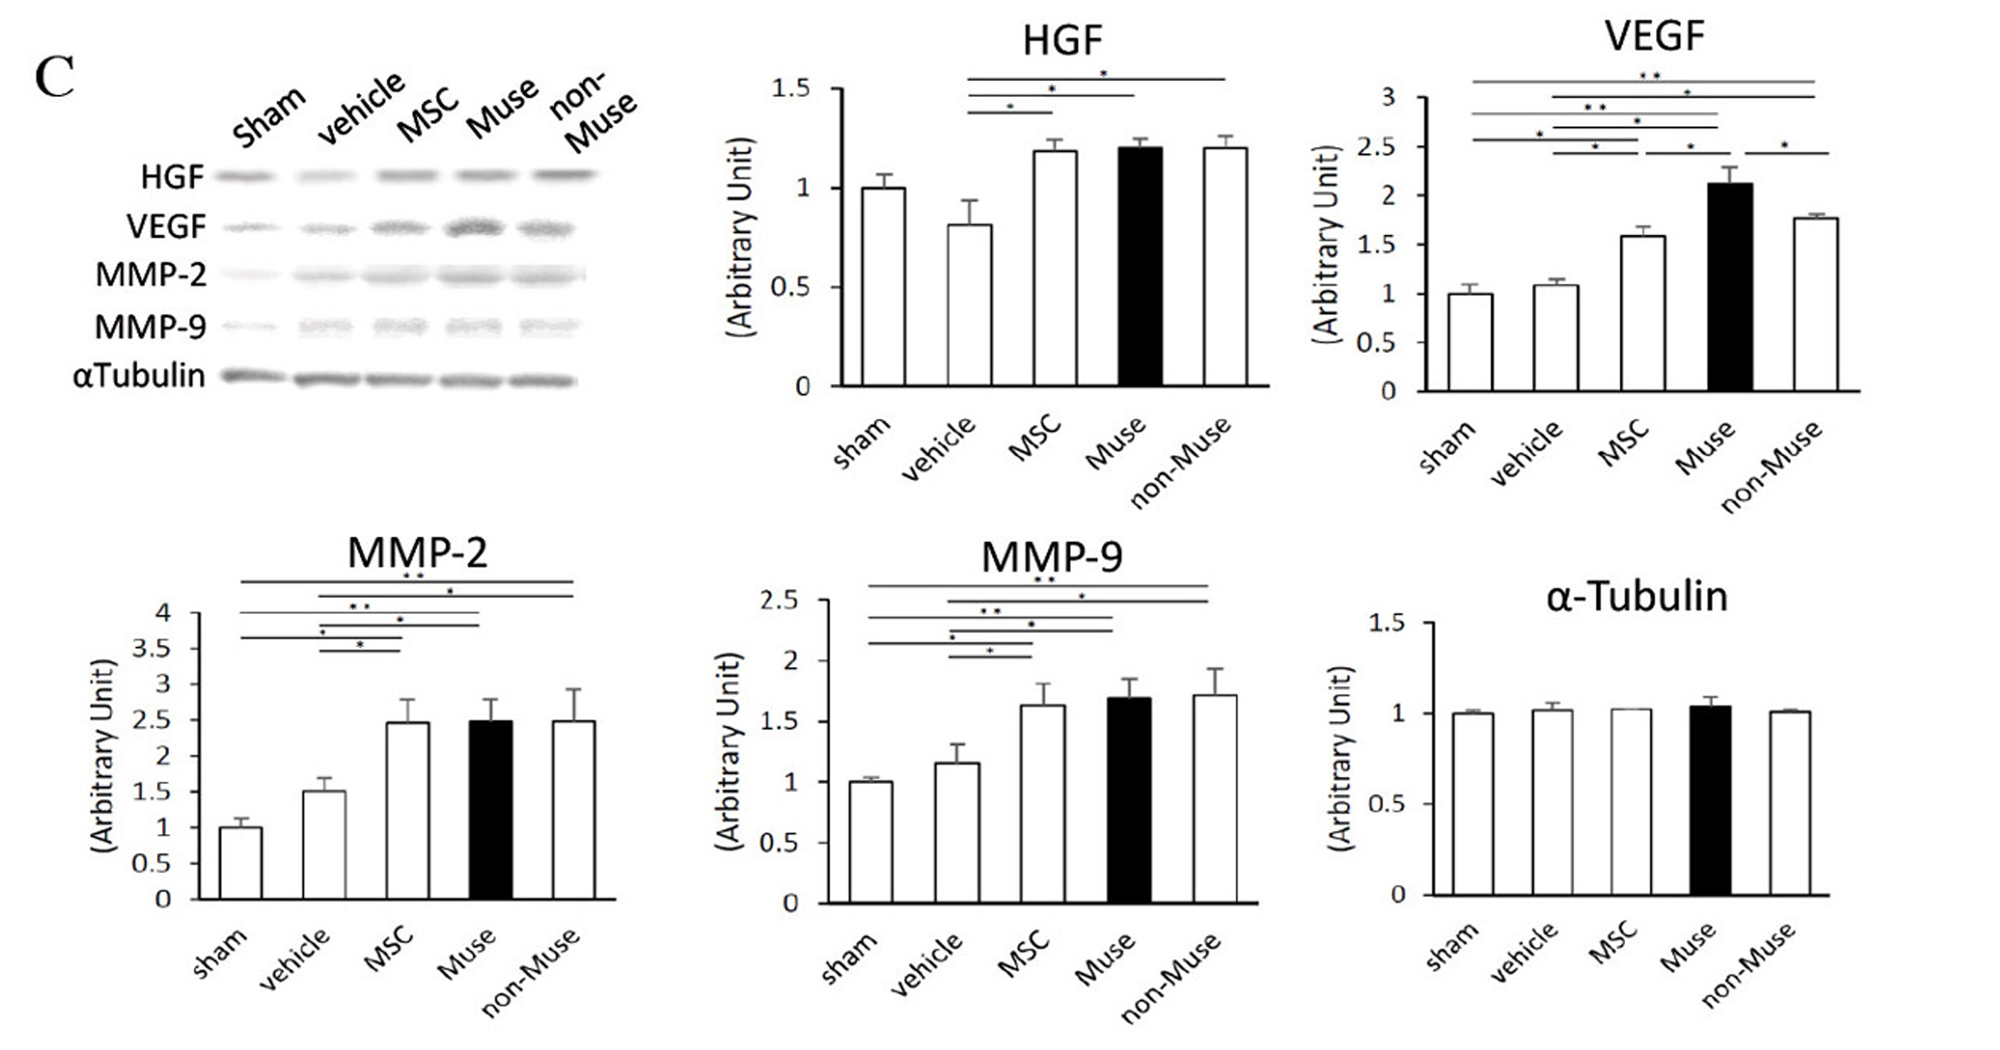 Figure 5. C, Western blot showing the expression of HGF, VEGF, MMP-2 and MMP-9 in the infarct border area 3 days after AMI (vehicle control, Muse, non-Muse and MSC groups).